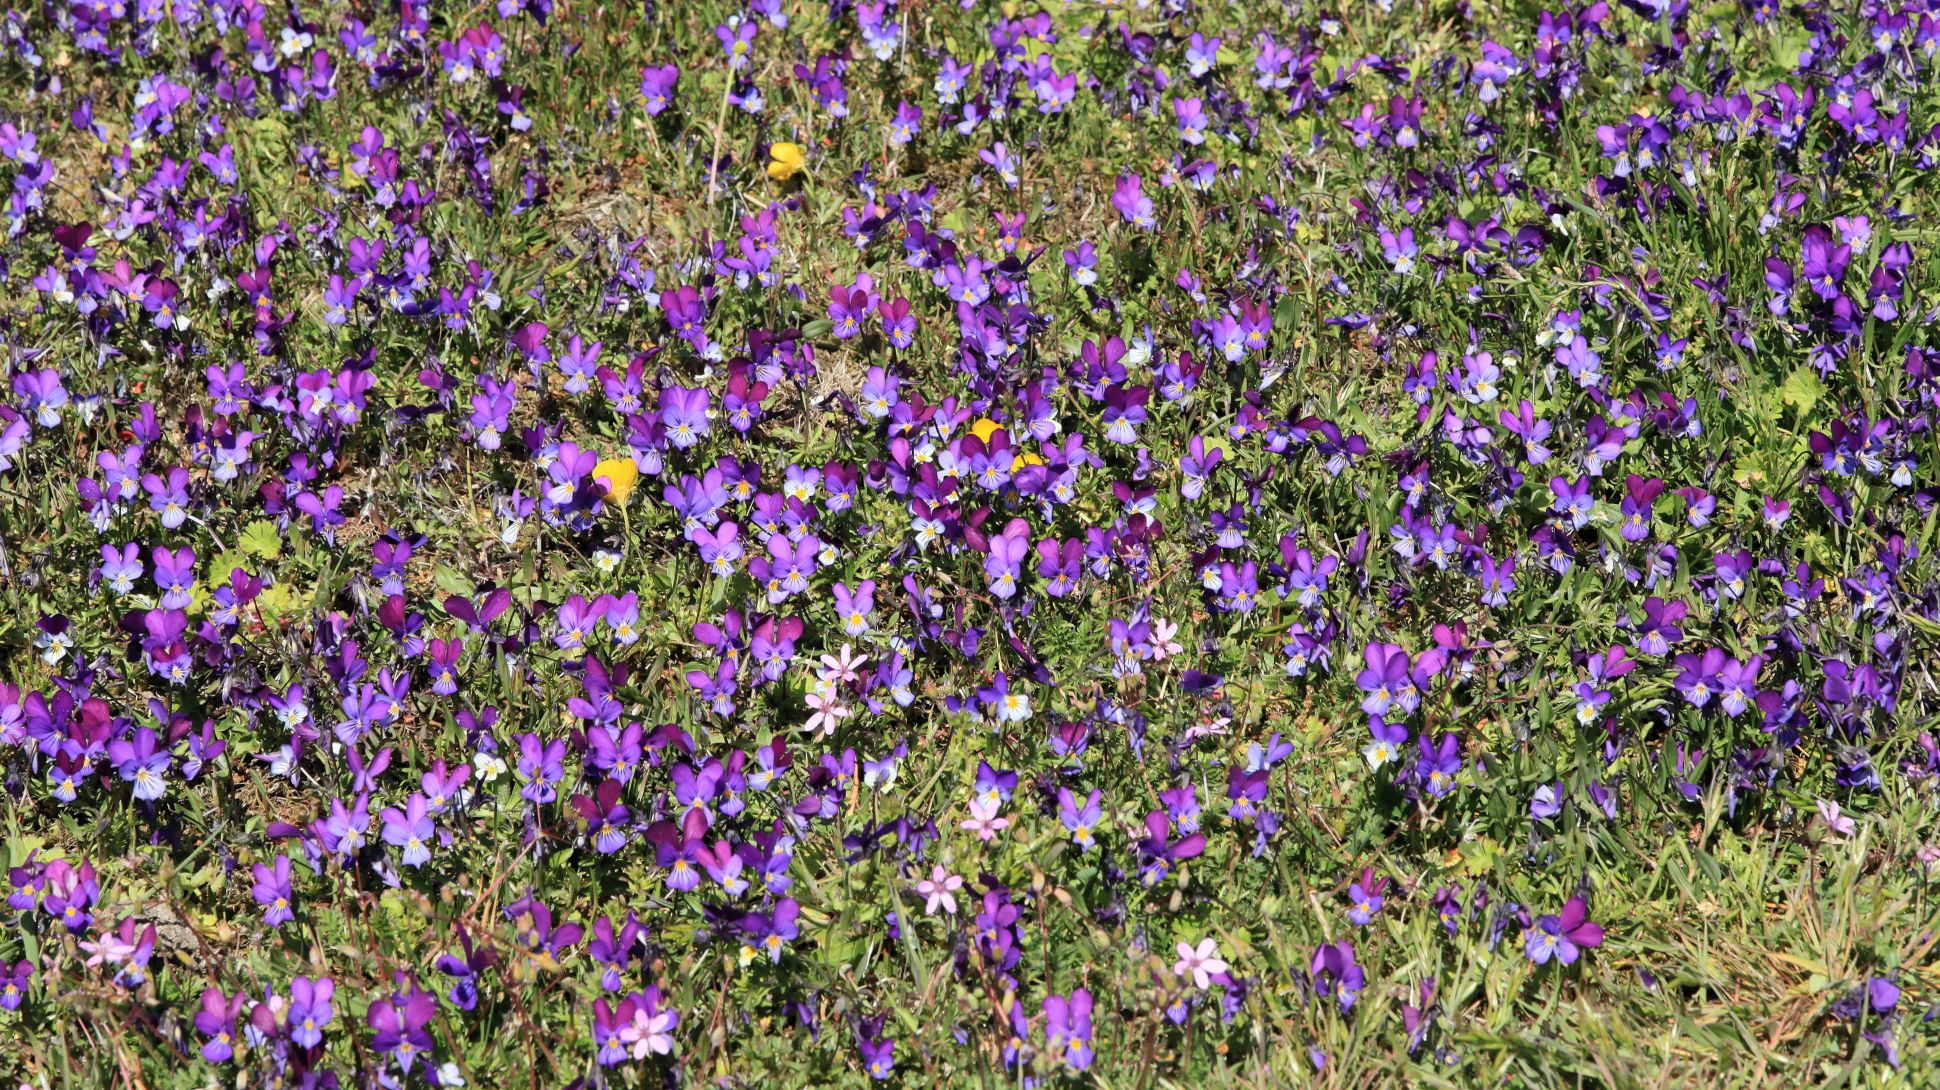 A large number of purple wild pansies growing in a grass field